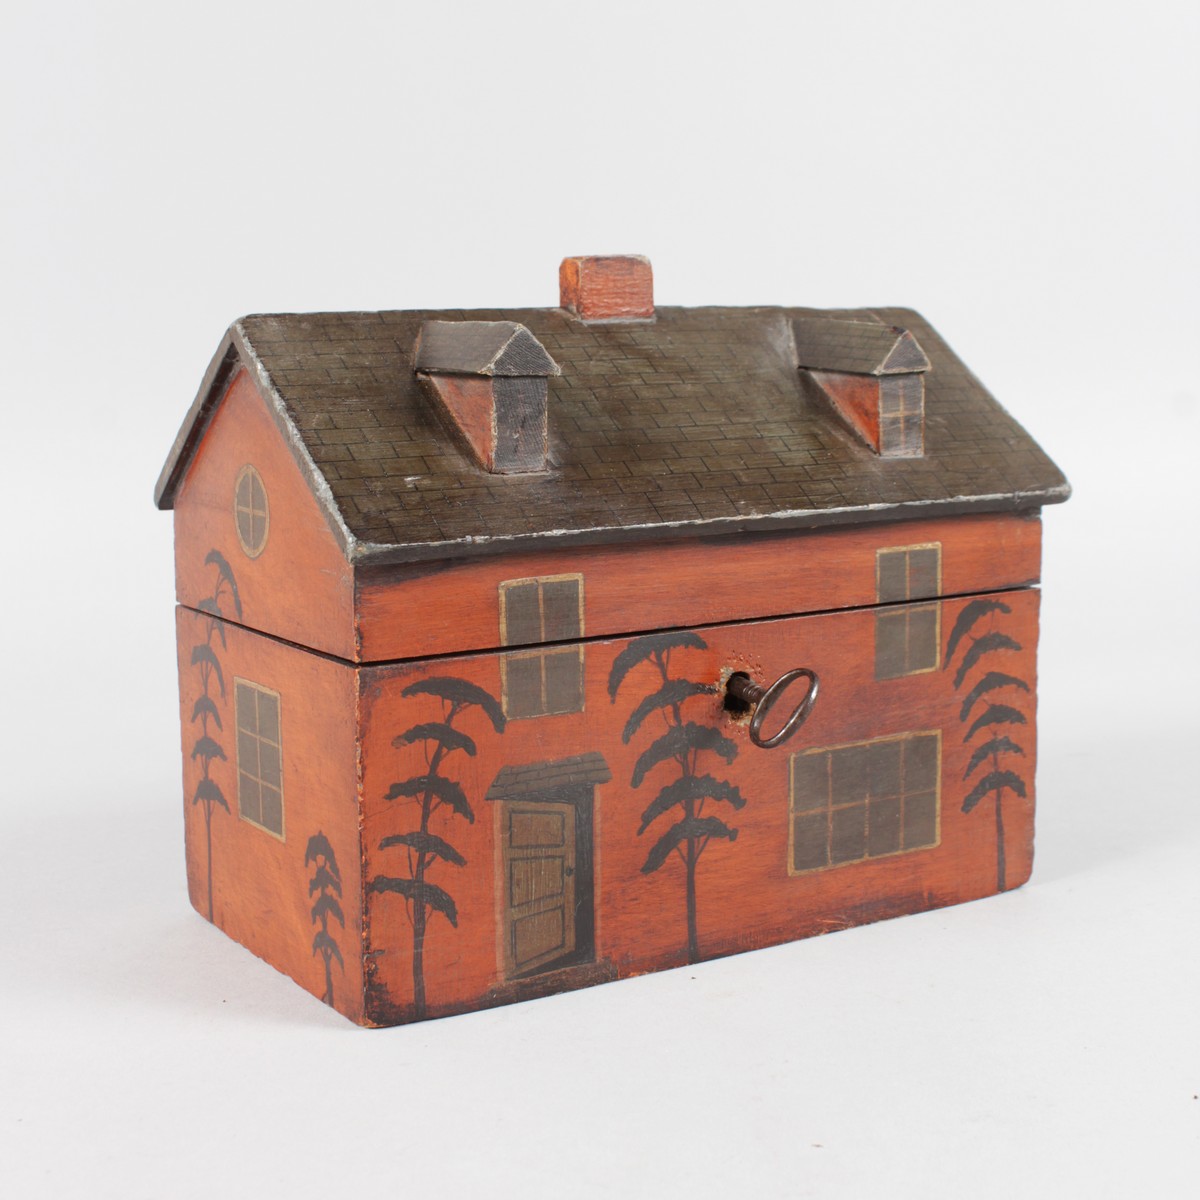 A GEORGIAN PAINTED WOOD TEA CADDY, the roof with chimney, two dormer windows, lift up roof, two